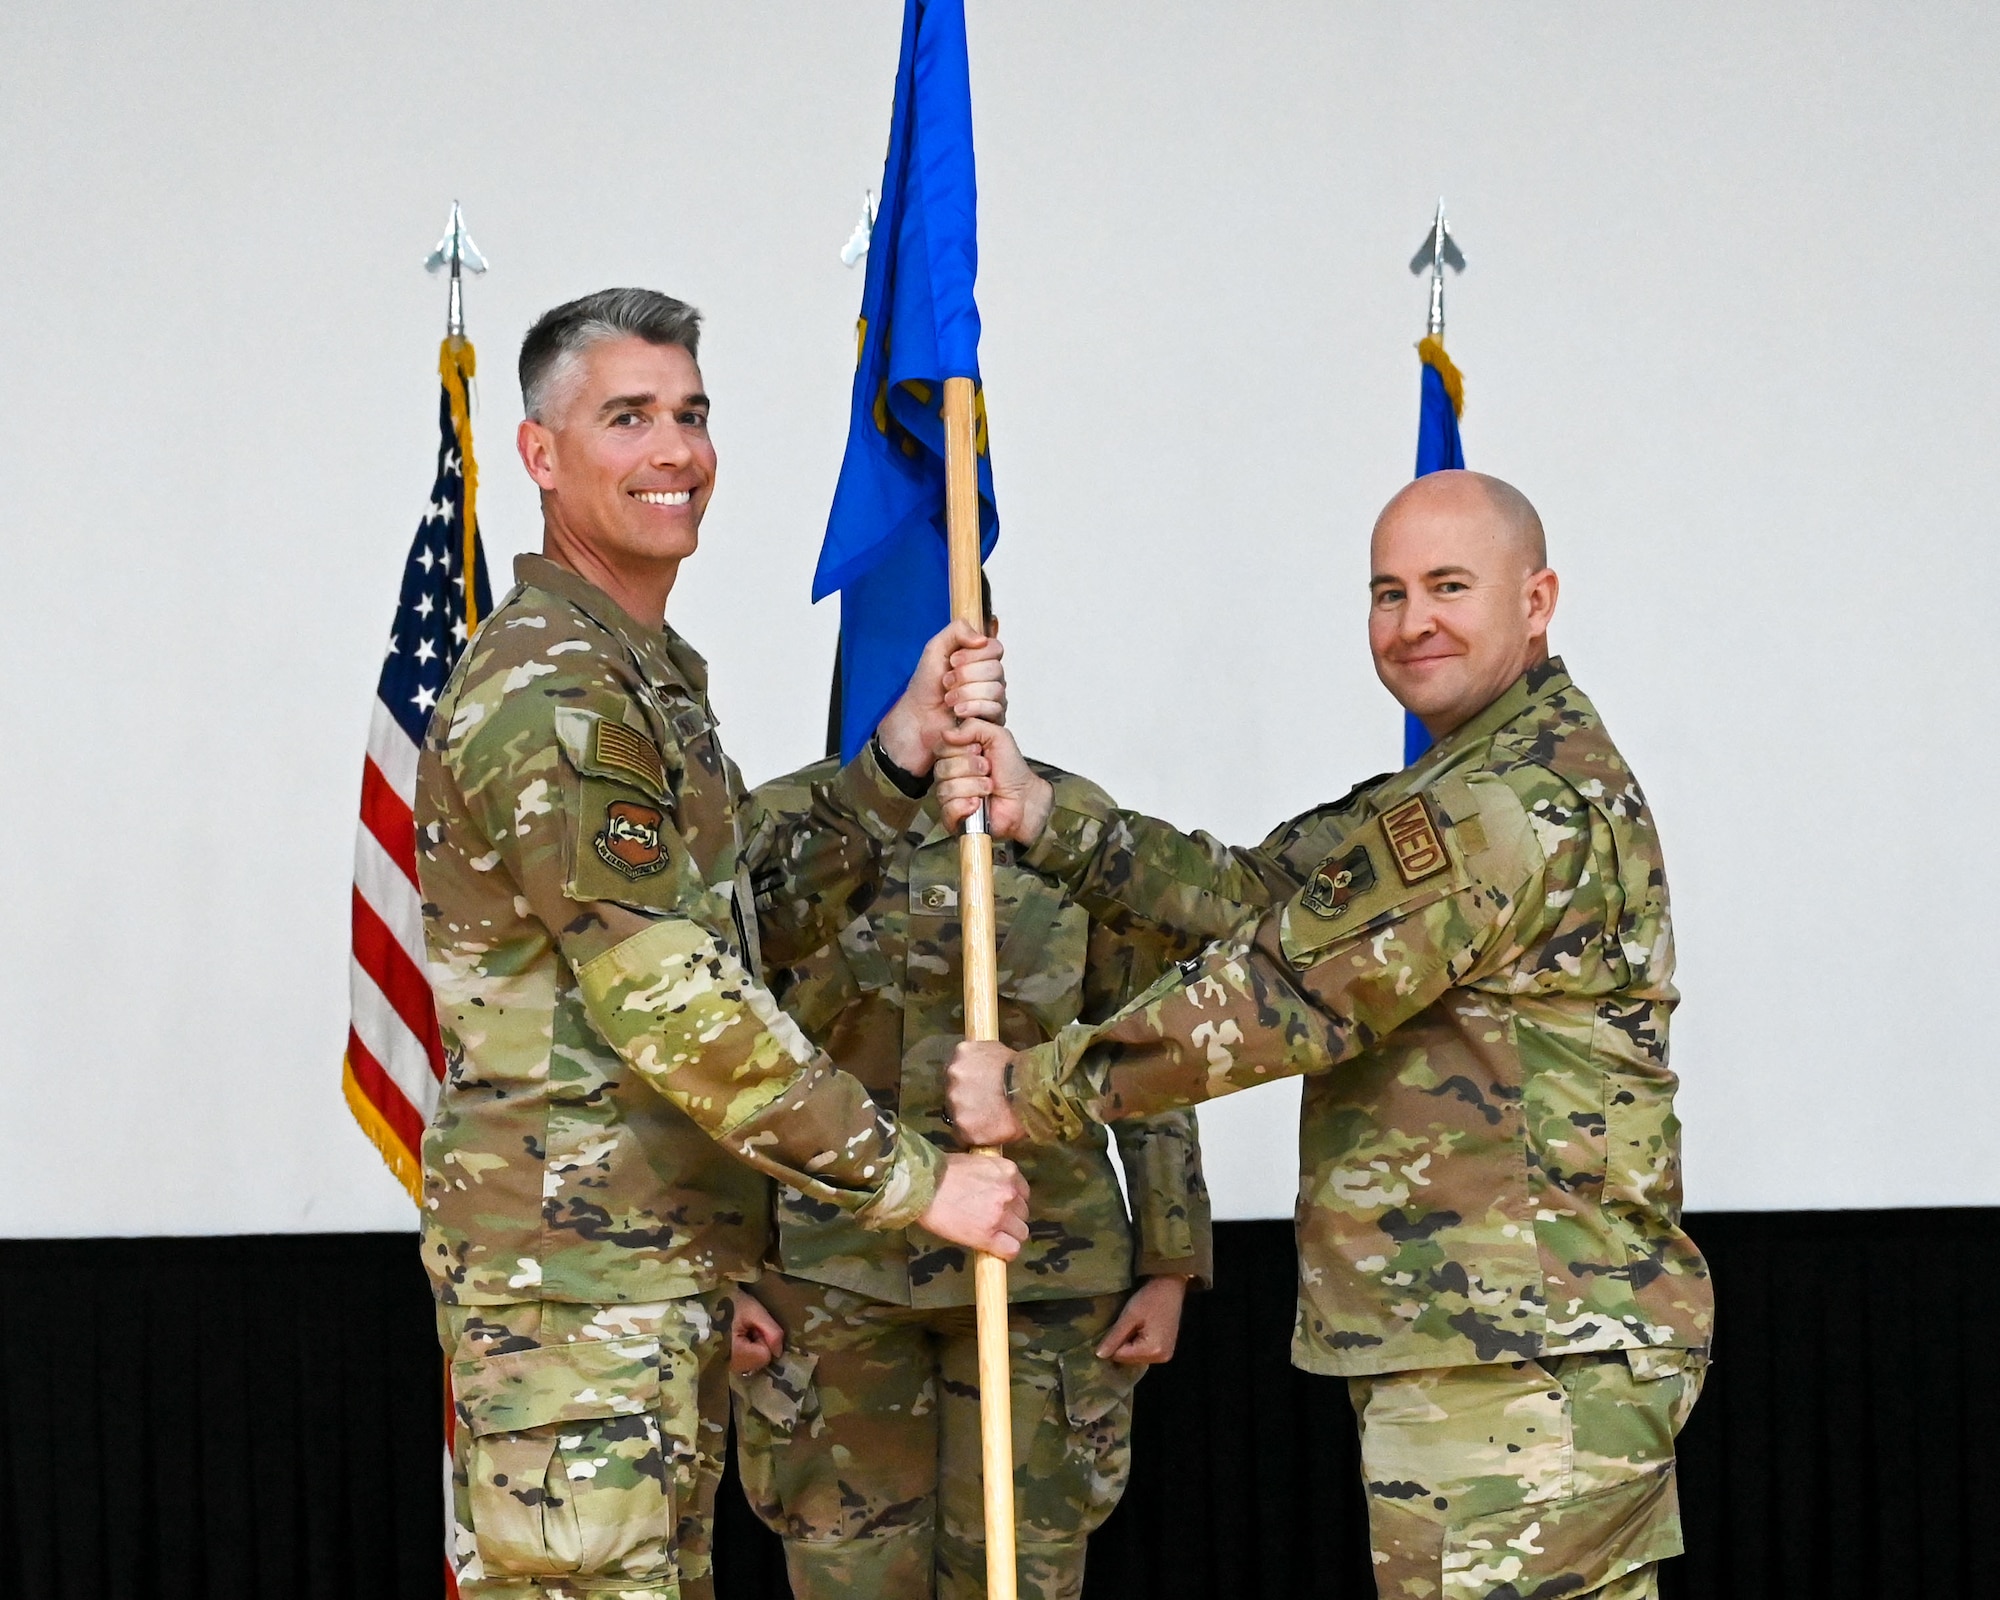 Col. George Buch, 386th Air Expeditionary Wing commander, passes the guidon to Lt. Col. Christopher Parker, incoming 386th EMDS commander, during a change of command ceremony at Ali Al Salem Air Base, Kuwait, May 30, 2023. The passing of the guidon symbolizes the passing of command from one commander to the next.